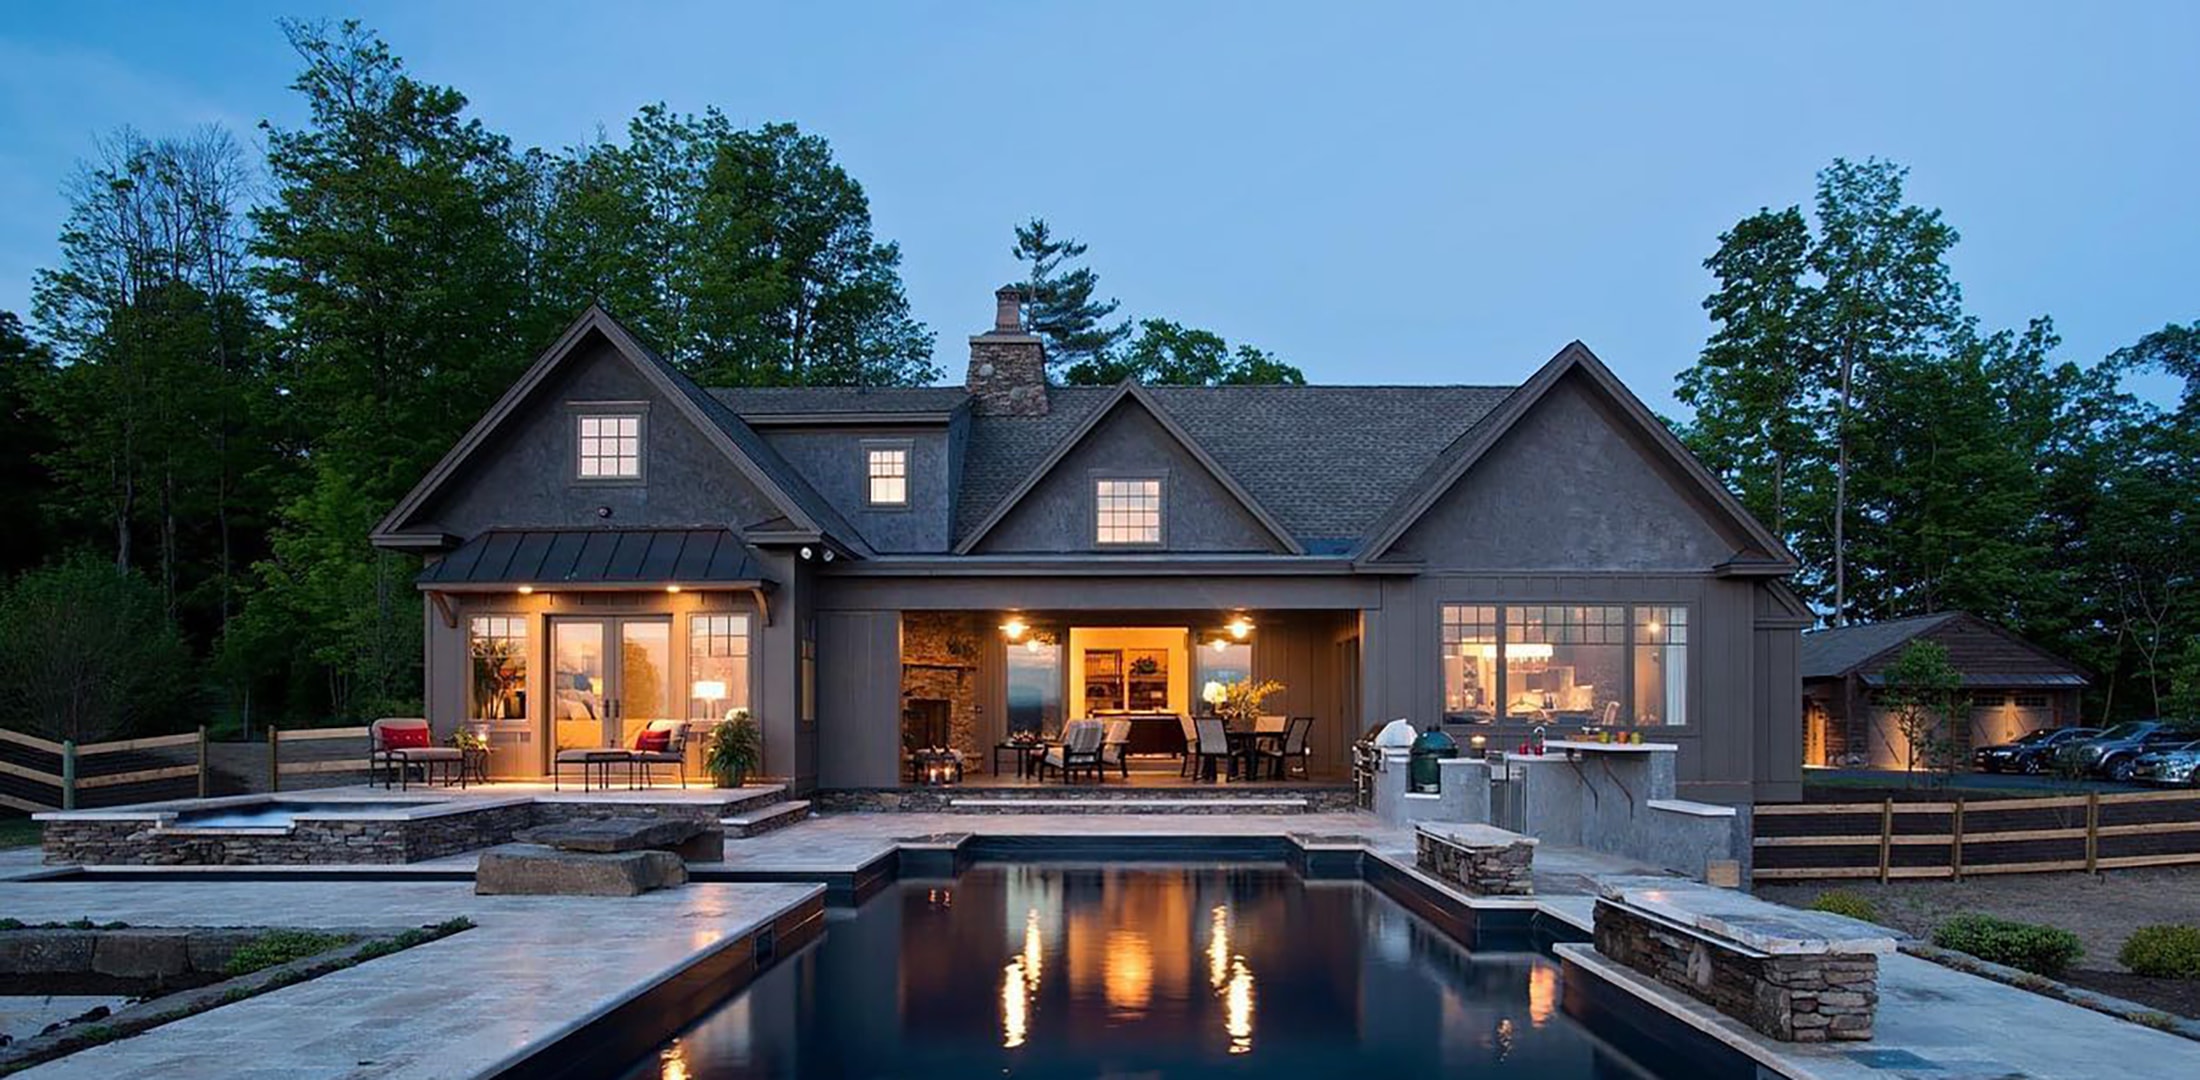 A farmhouse with gray windows and gray patio doors creates inviting exterior space by the pool.